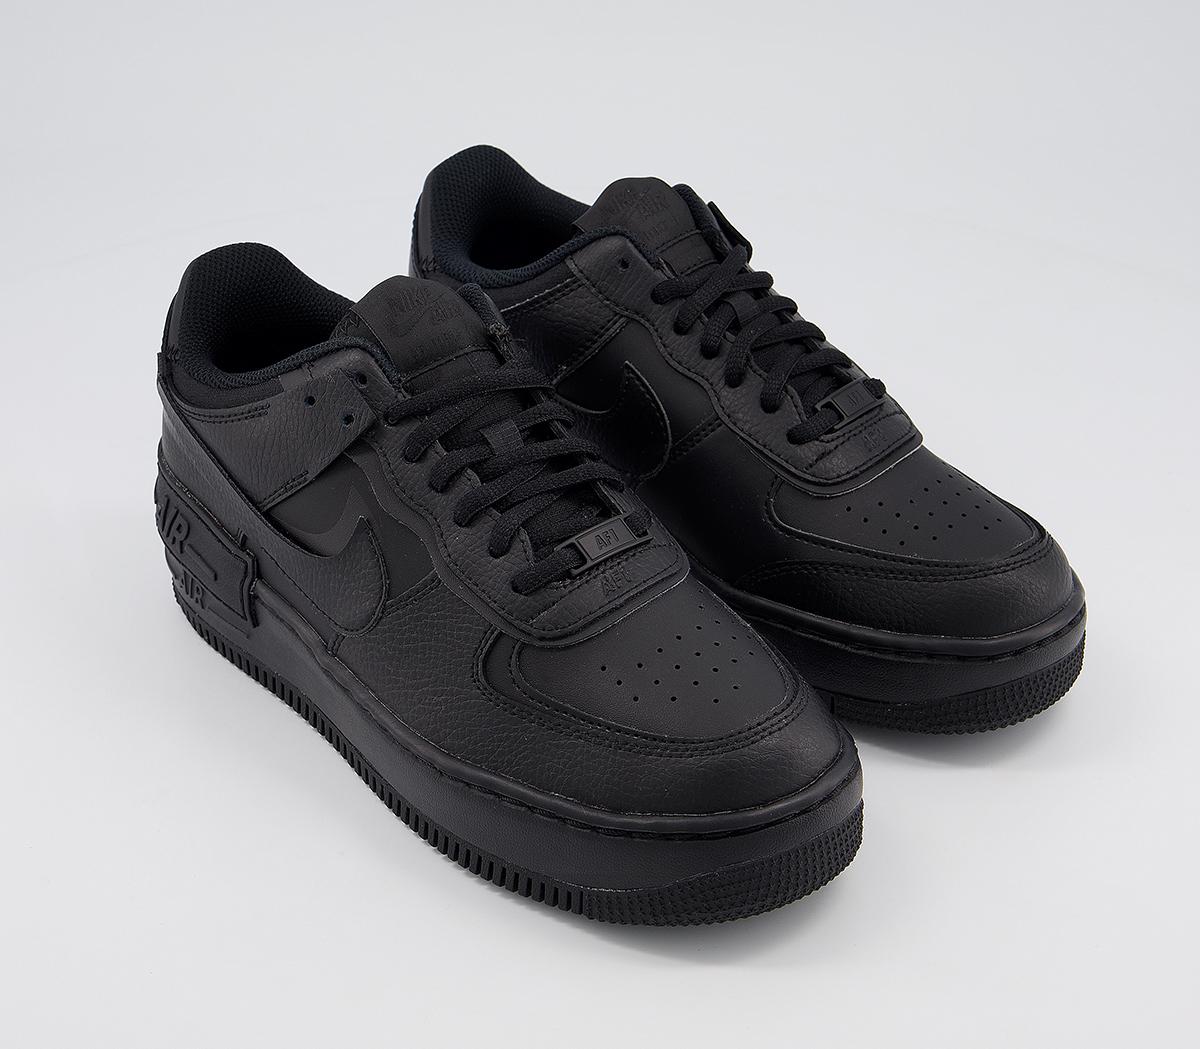 Nike Air Force 1 Shadow Trainers Black - Hers trainers